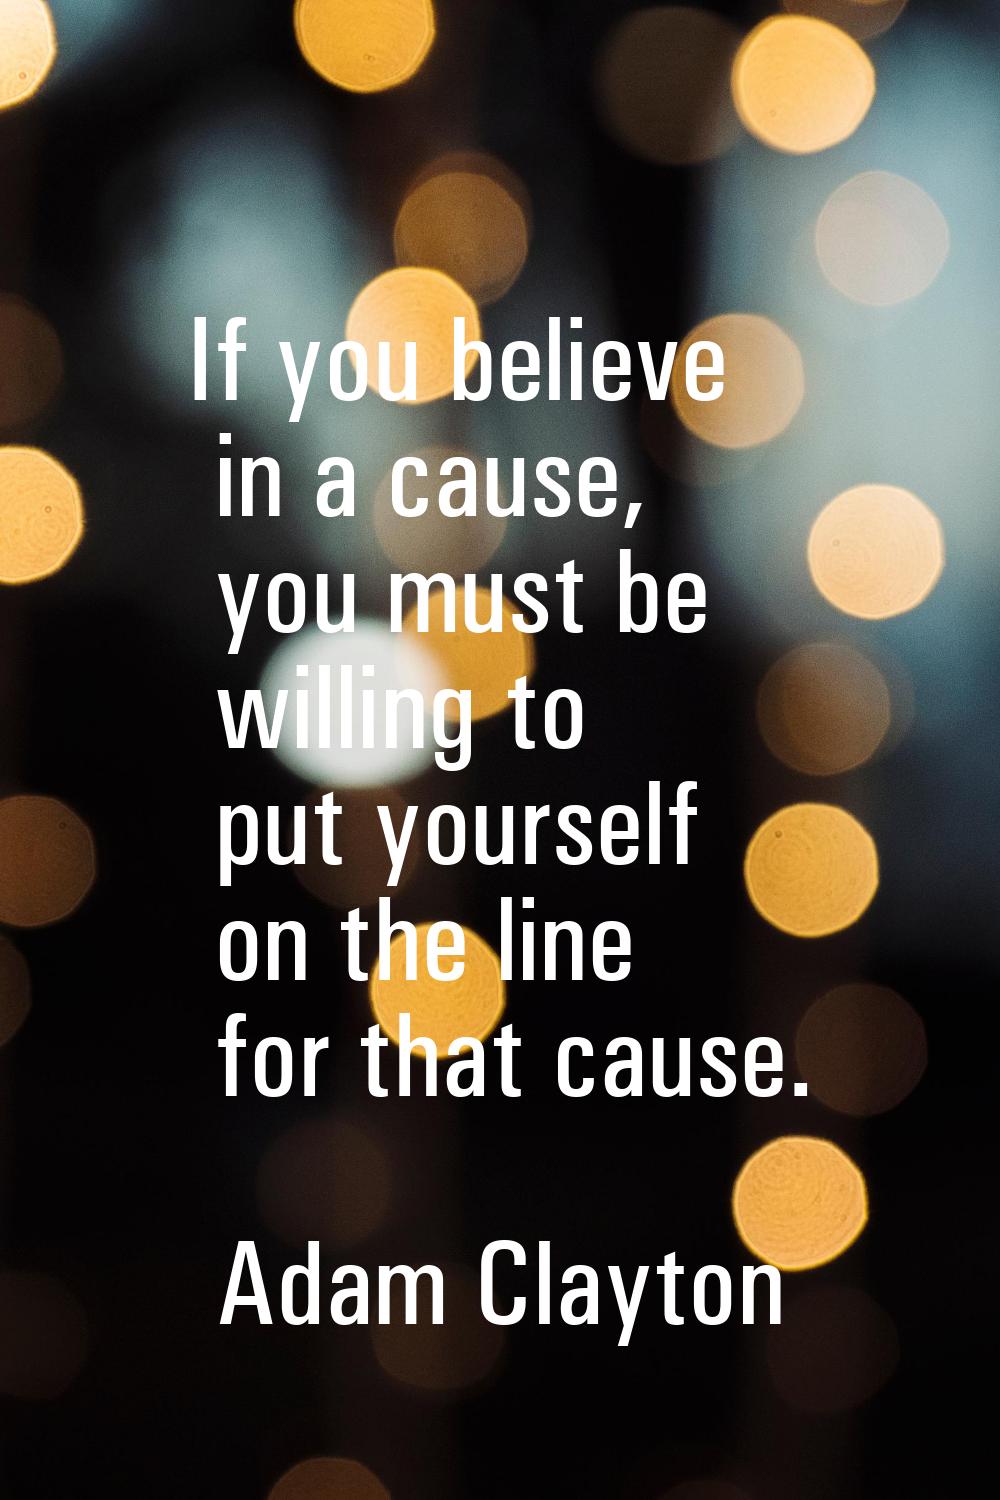 If you believe in a cause, you must be willing to put yourself on the line for that cause.